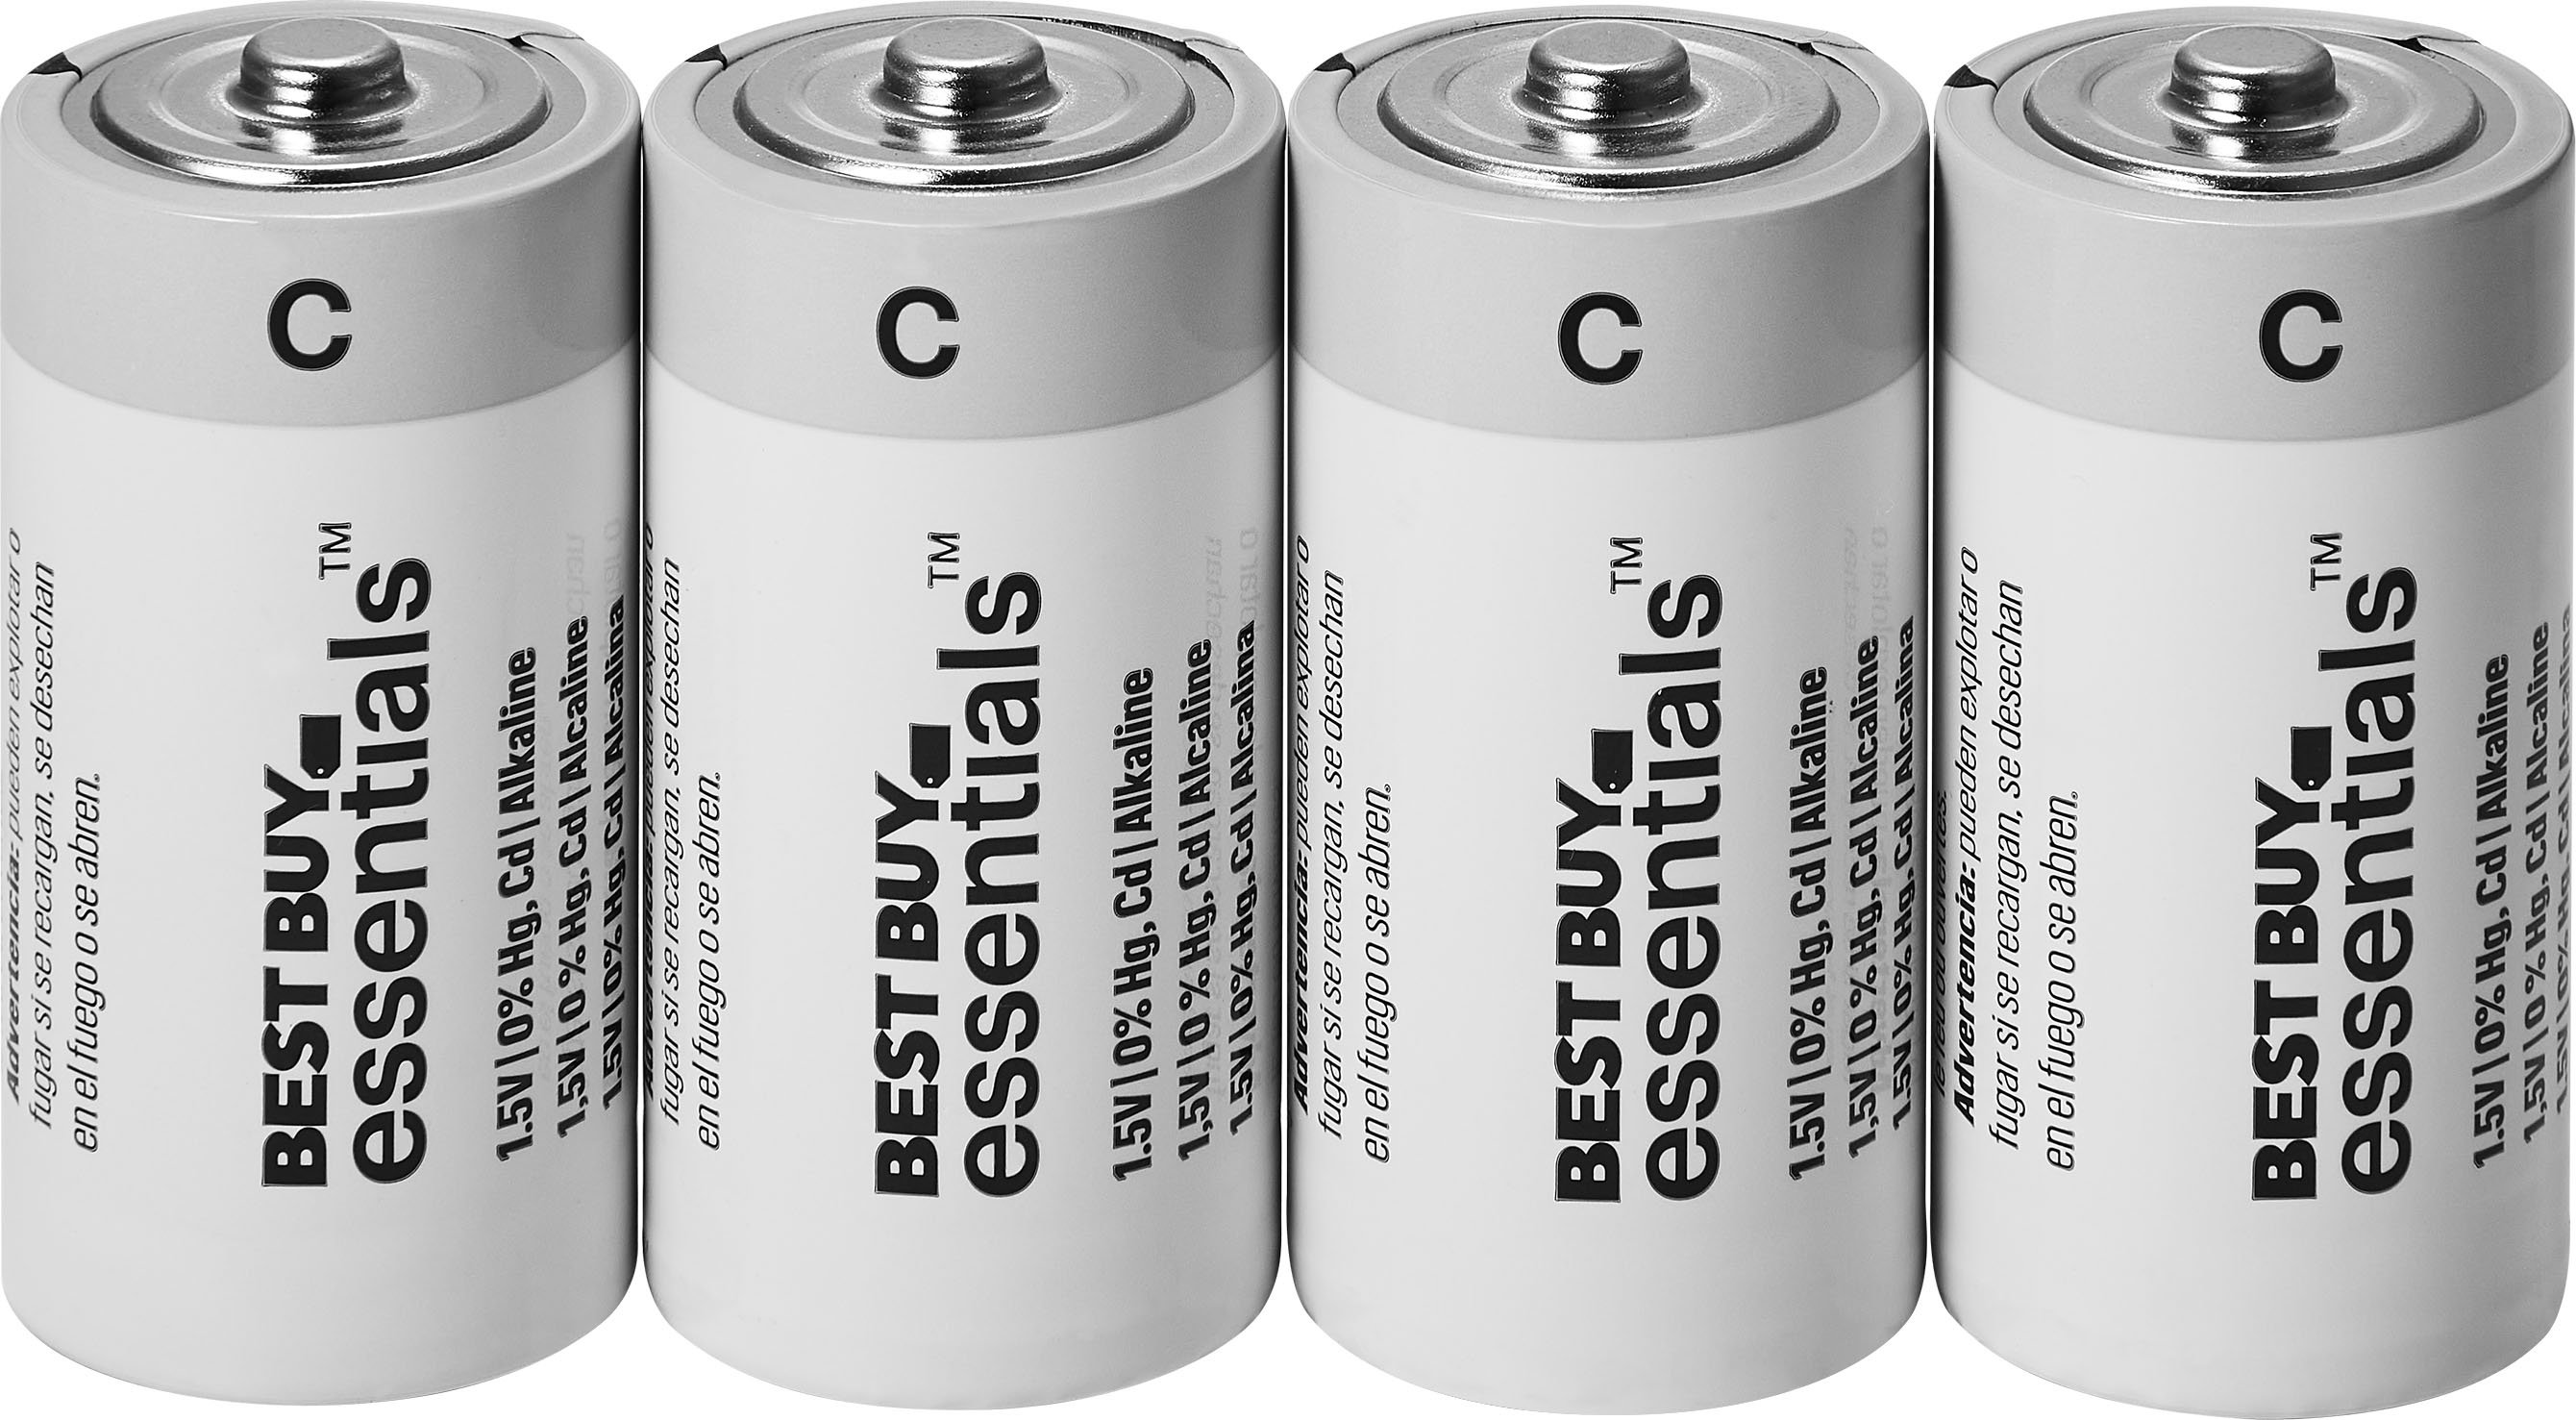 Which are the best batteries to buy